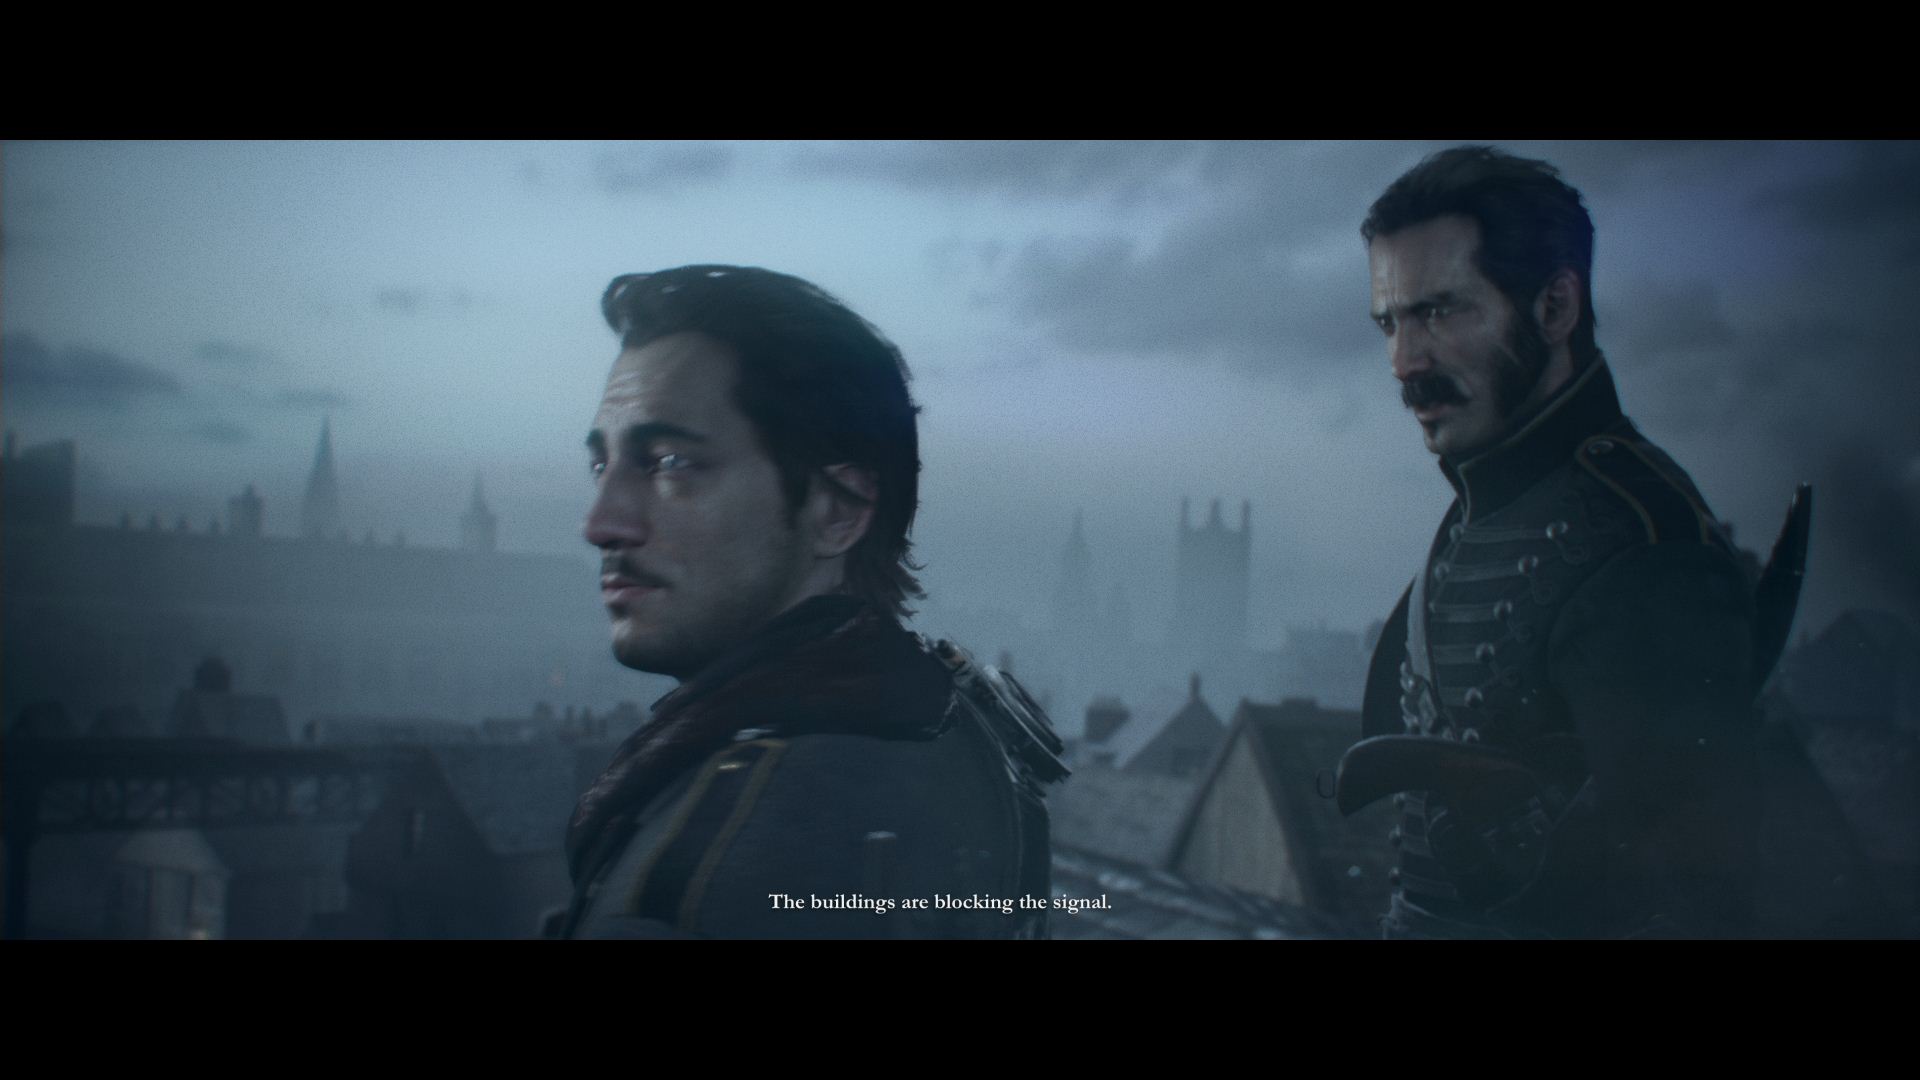 The order 1886 город. The order 1886 Gameplay. The order 1886 дирижабль. Order 1886 City Art.